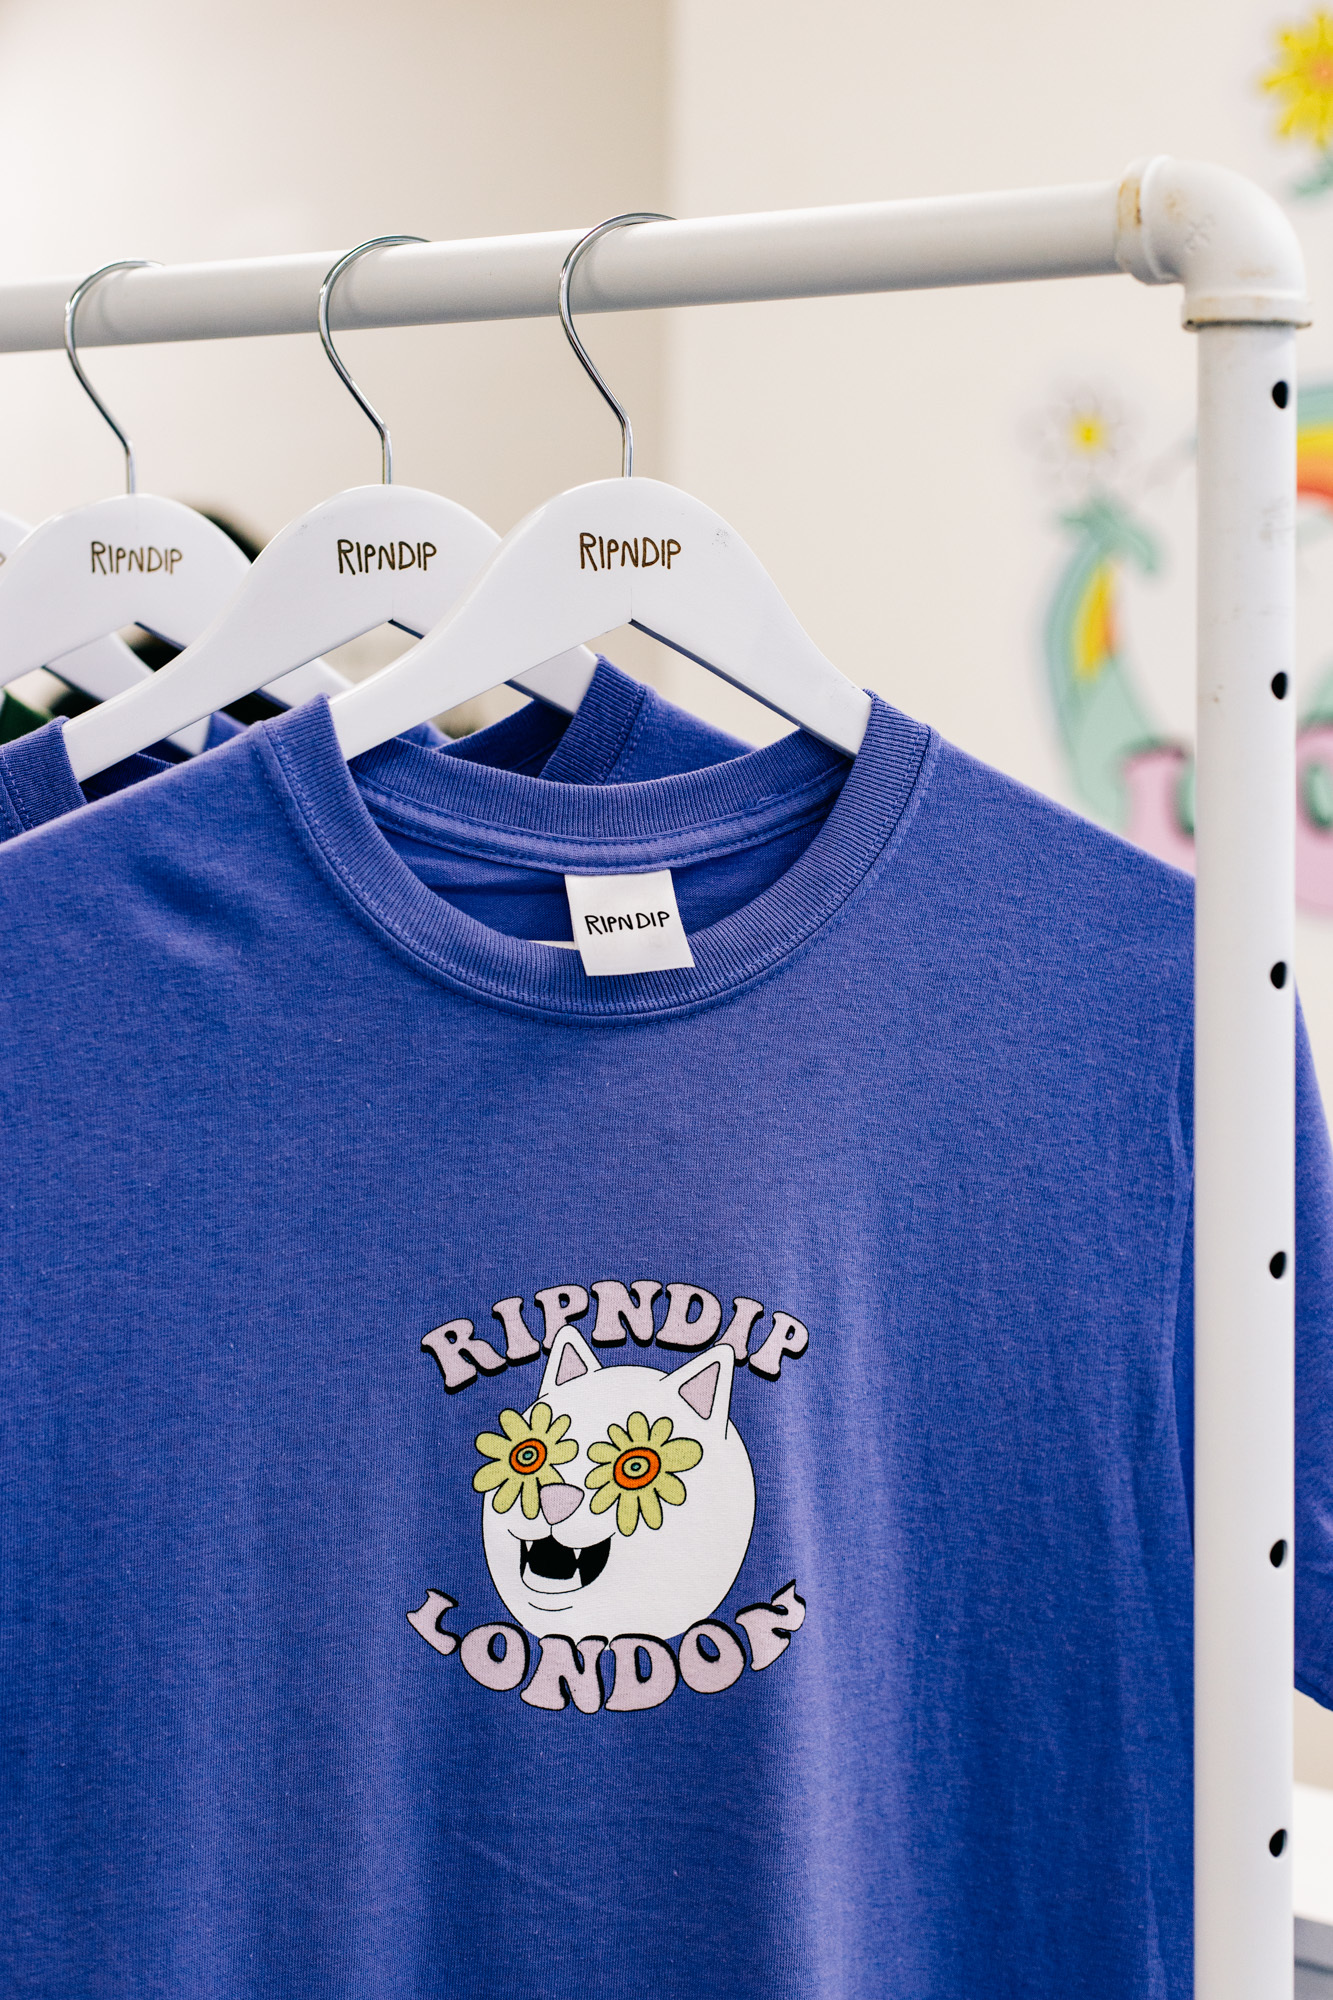 Ripndip, pop up, how to build a pop up, London pop up, things to see in London, short-term retail,